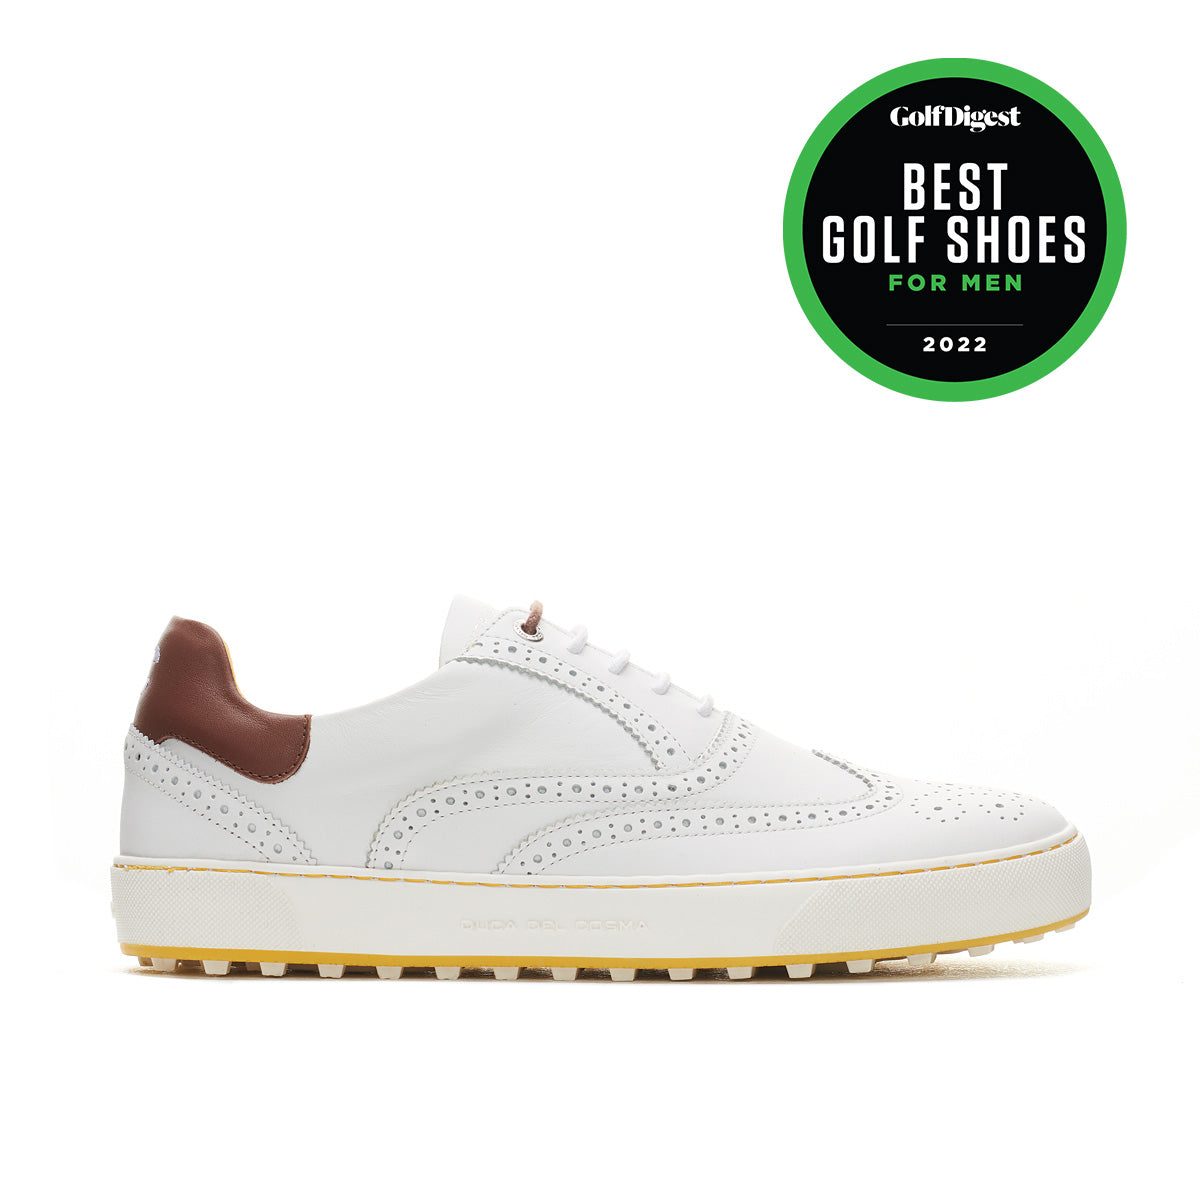 Introduction to Men's Golf Shoes